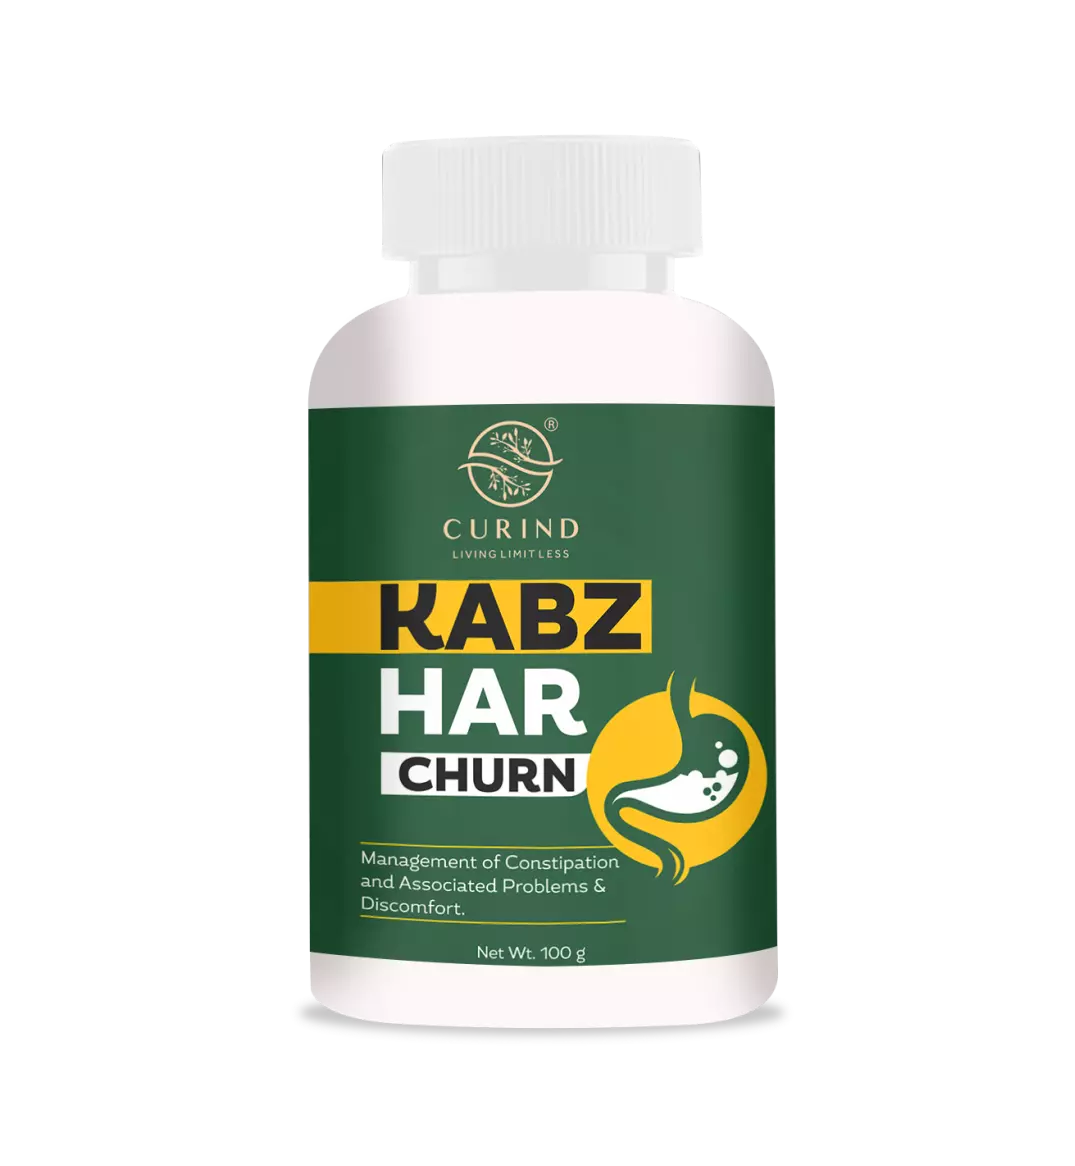 CURIND Kabz Har Churn- best for digestion and constipation